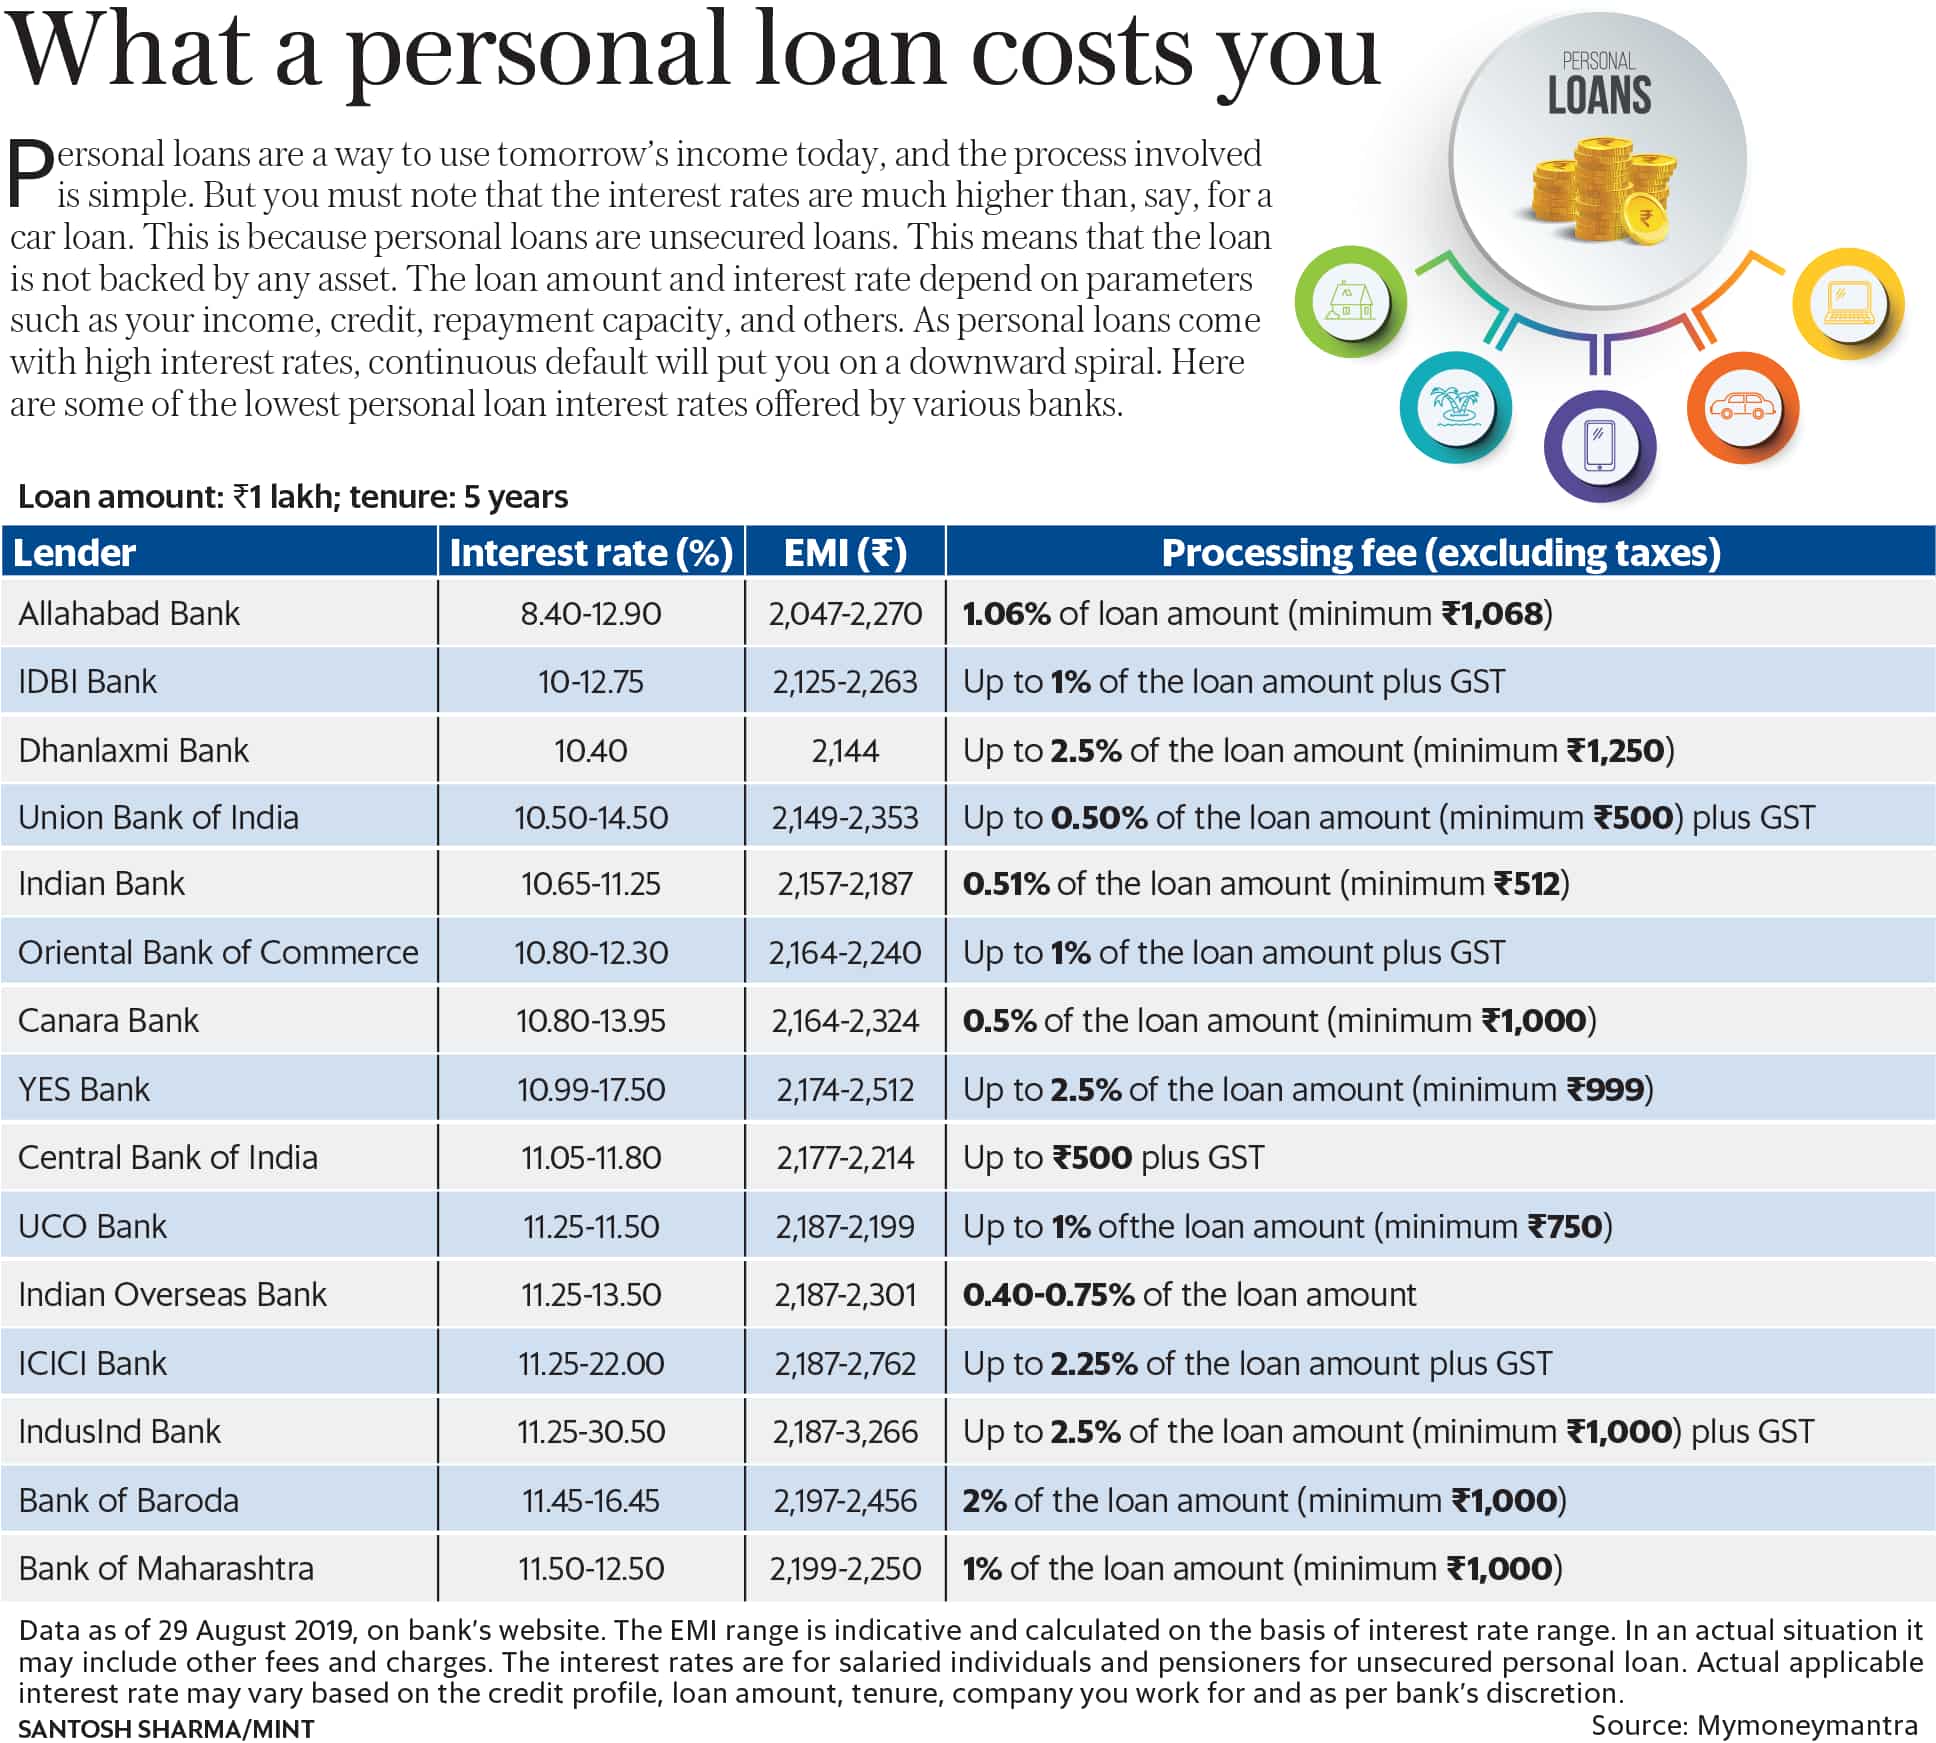 Top 15 banks that offer the lowest personal loan rates